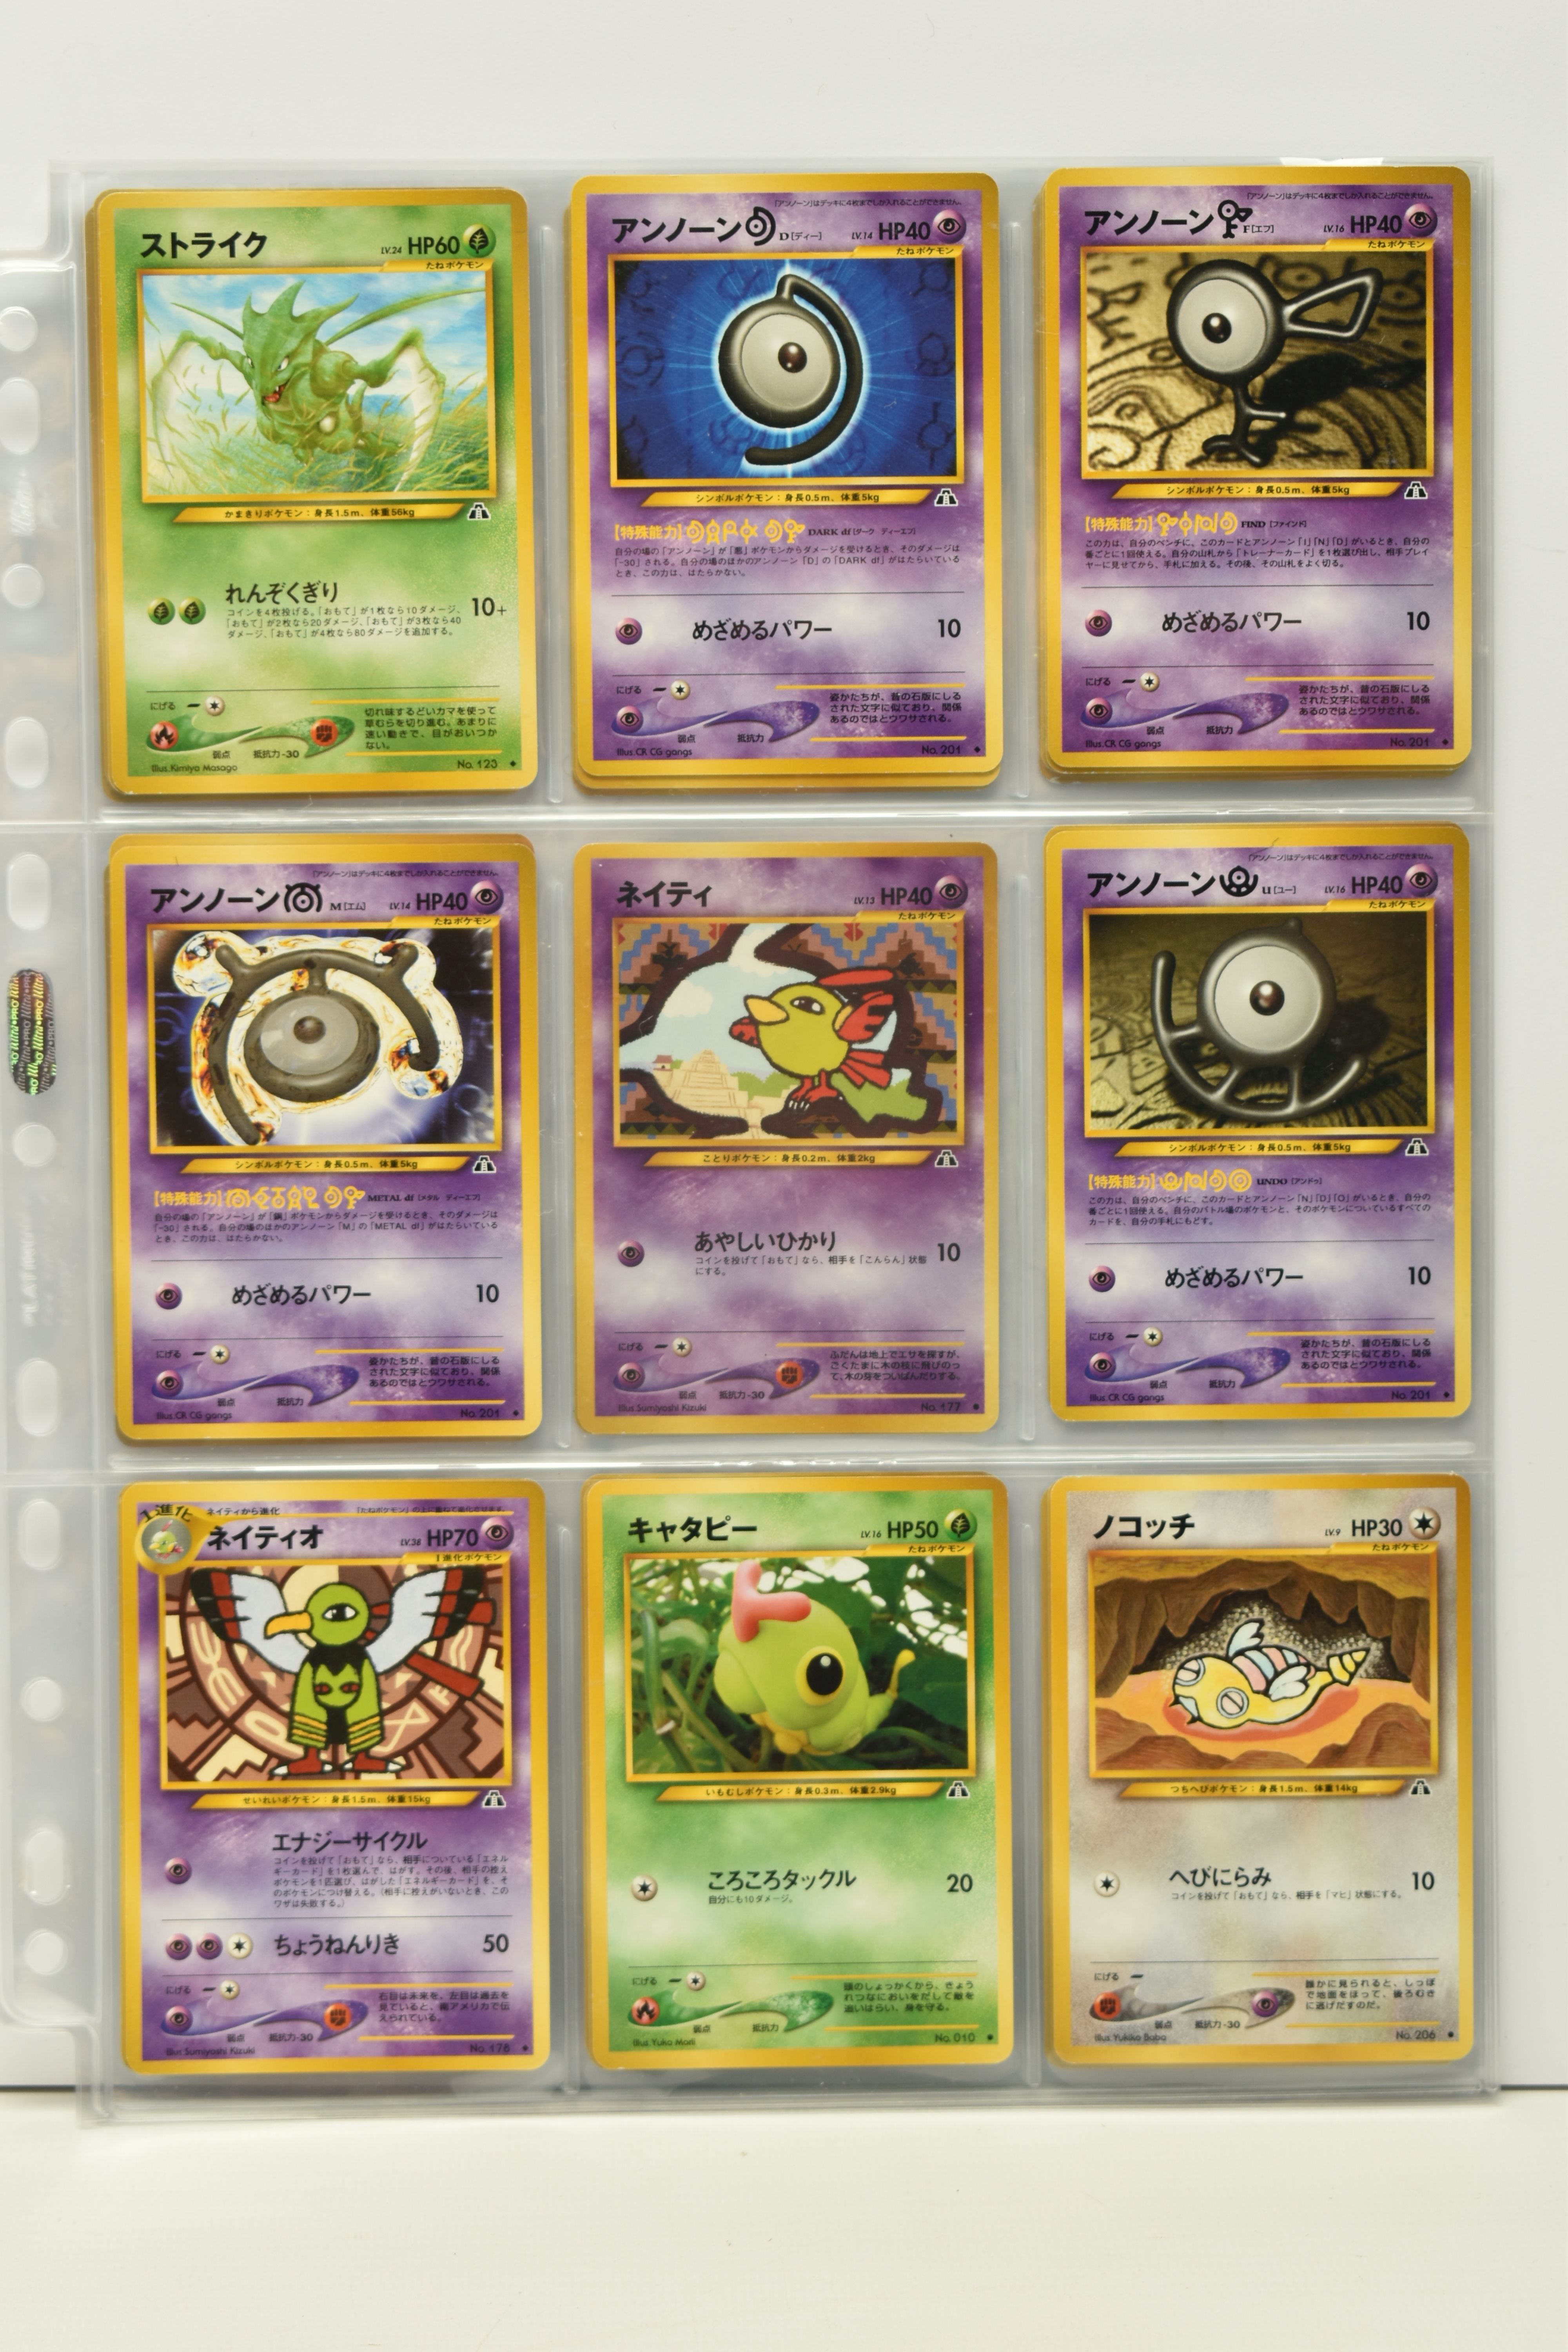 POKEMON JAPANESE NEO DISCOVERY COLECTION, contains most of the set including the holographic Espeon, - Image 4 of 7